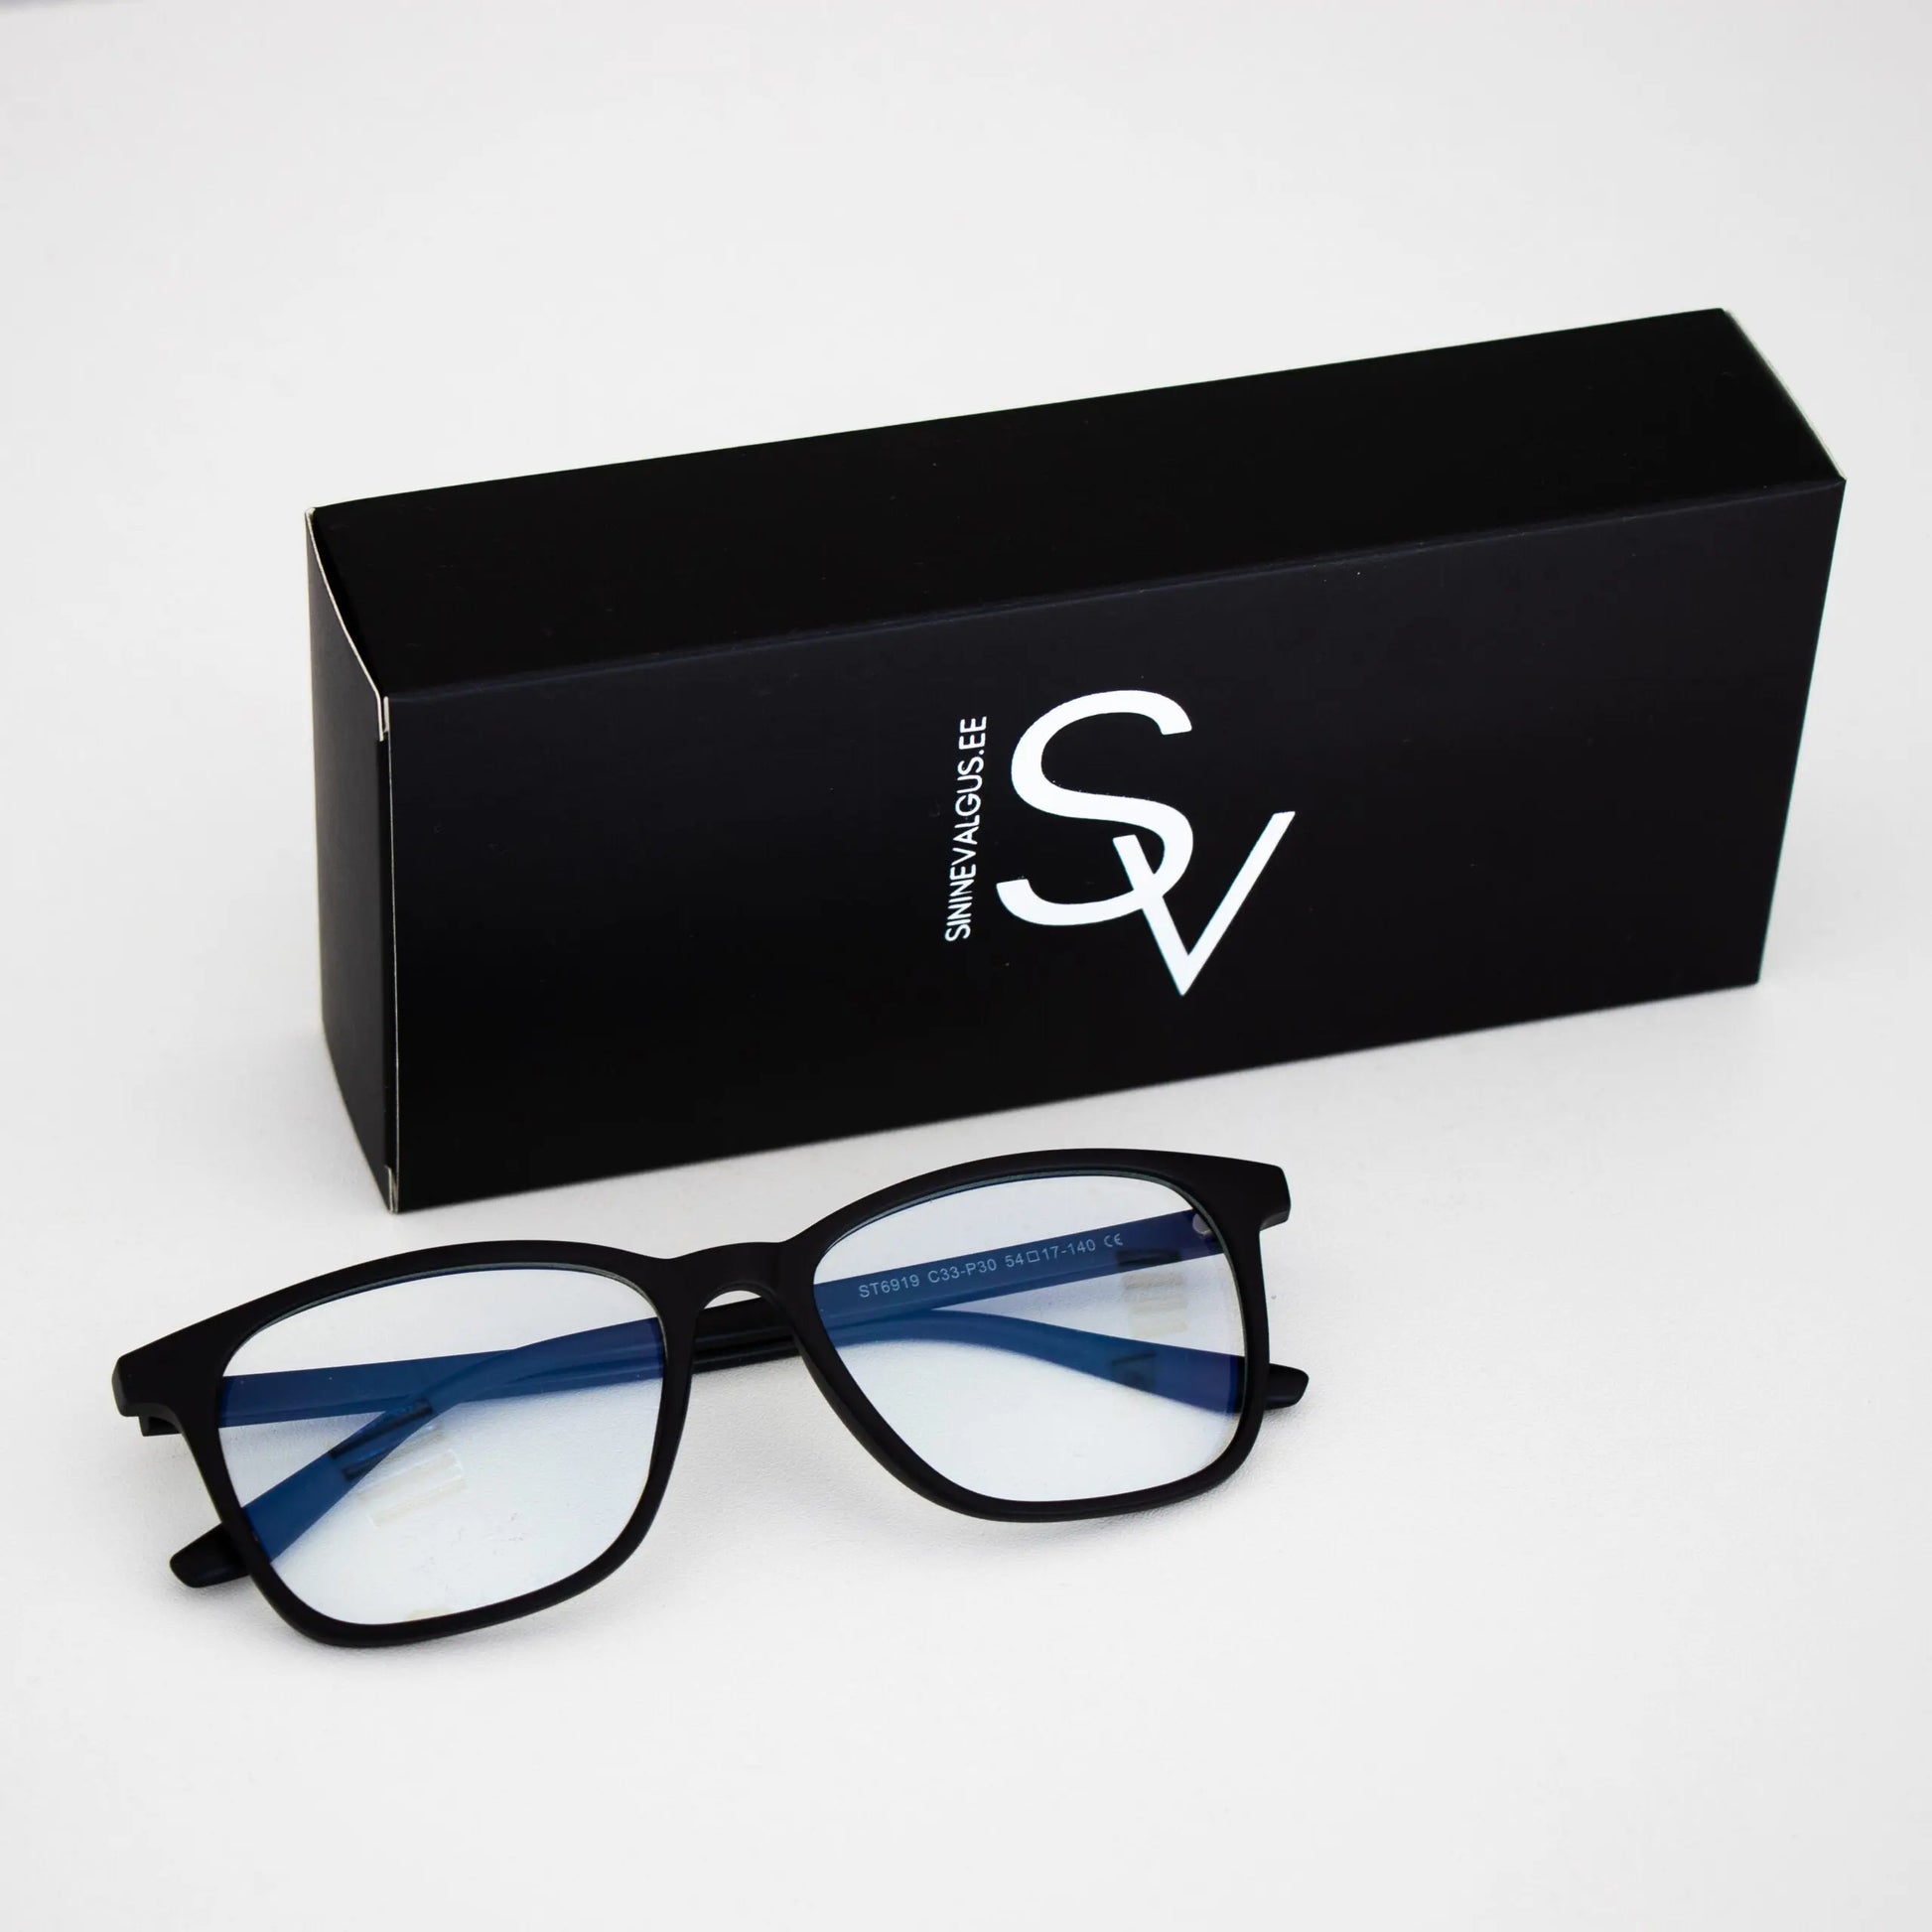 NEWCASTLE Blue Light Glasses: Airy, light eyewear with zero-power lenses. Protects eyes from blue and UV light. Ideal for screen time, work, or relaxing. European design by Sinine Valgus.